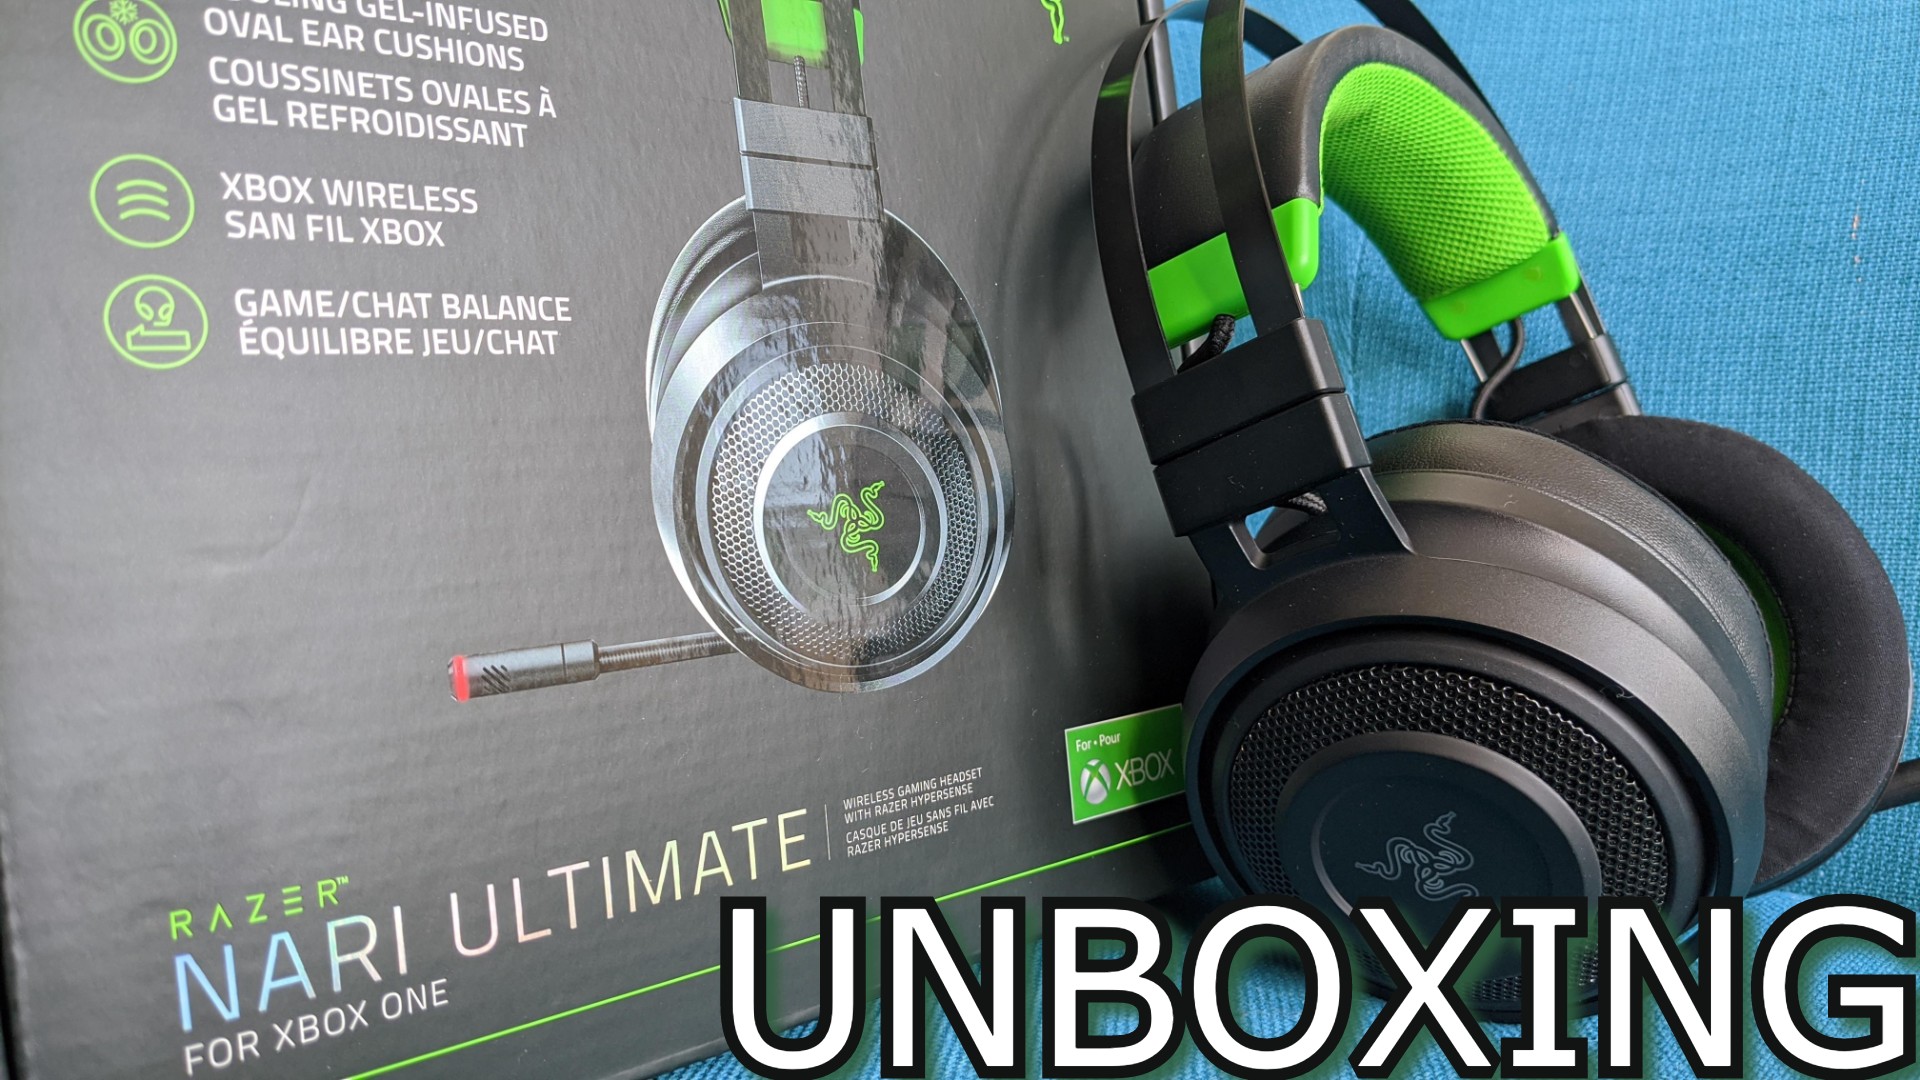 Unboxing and first look at the stunning Razer Nari Ultimate